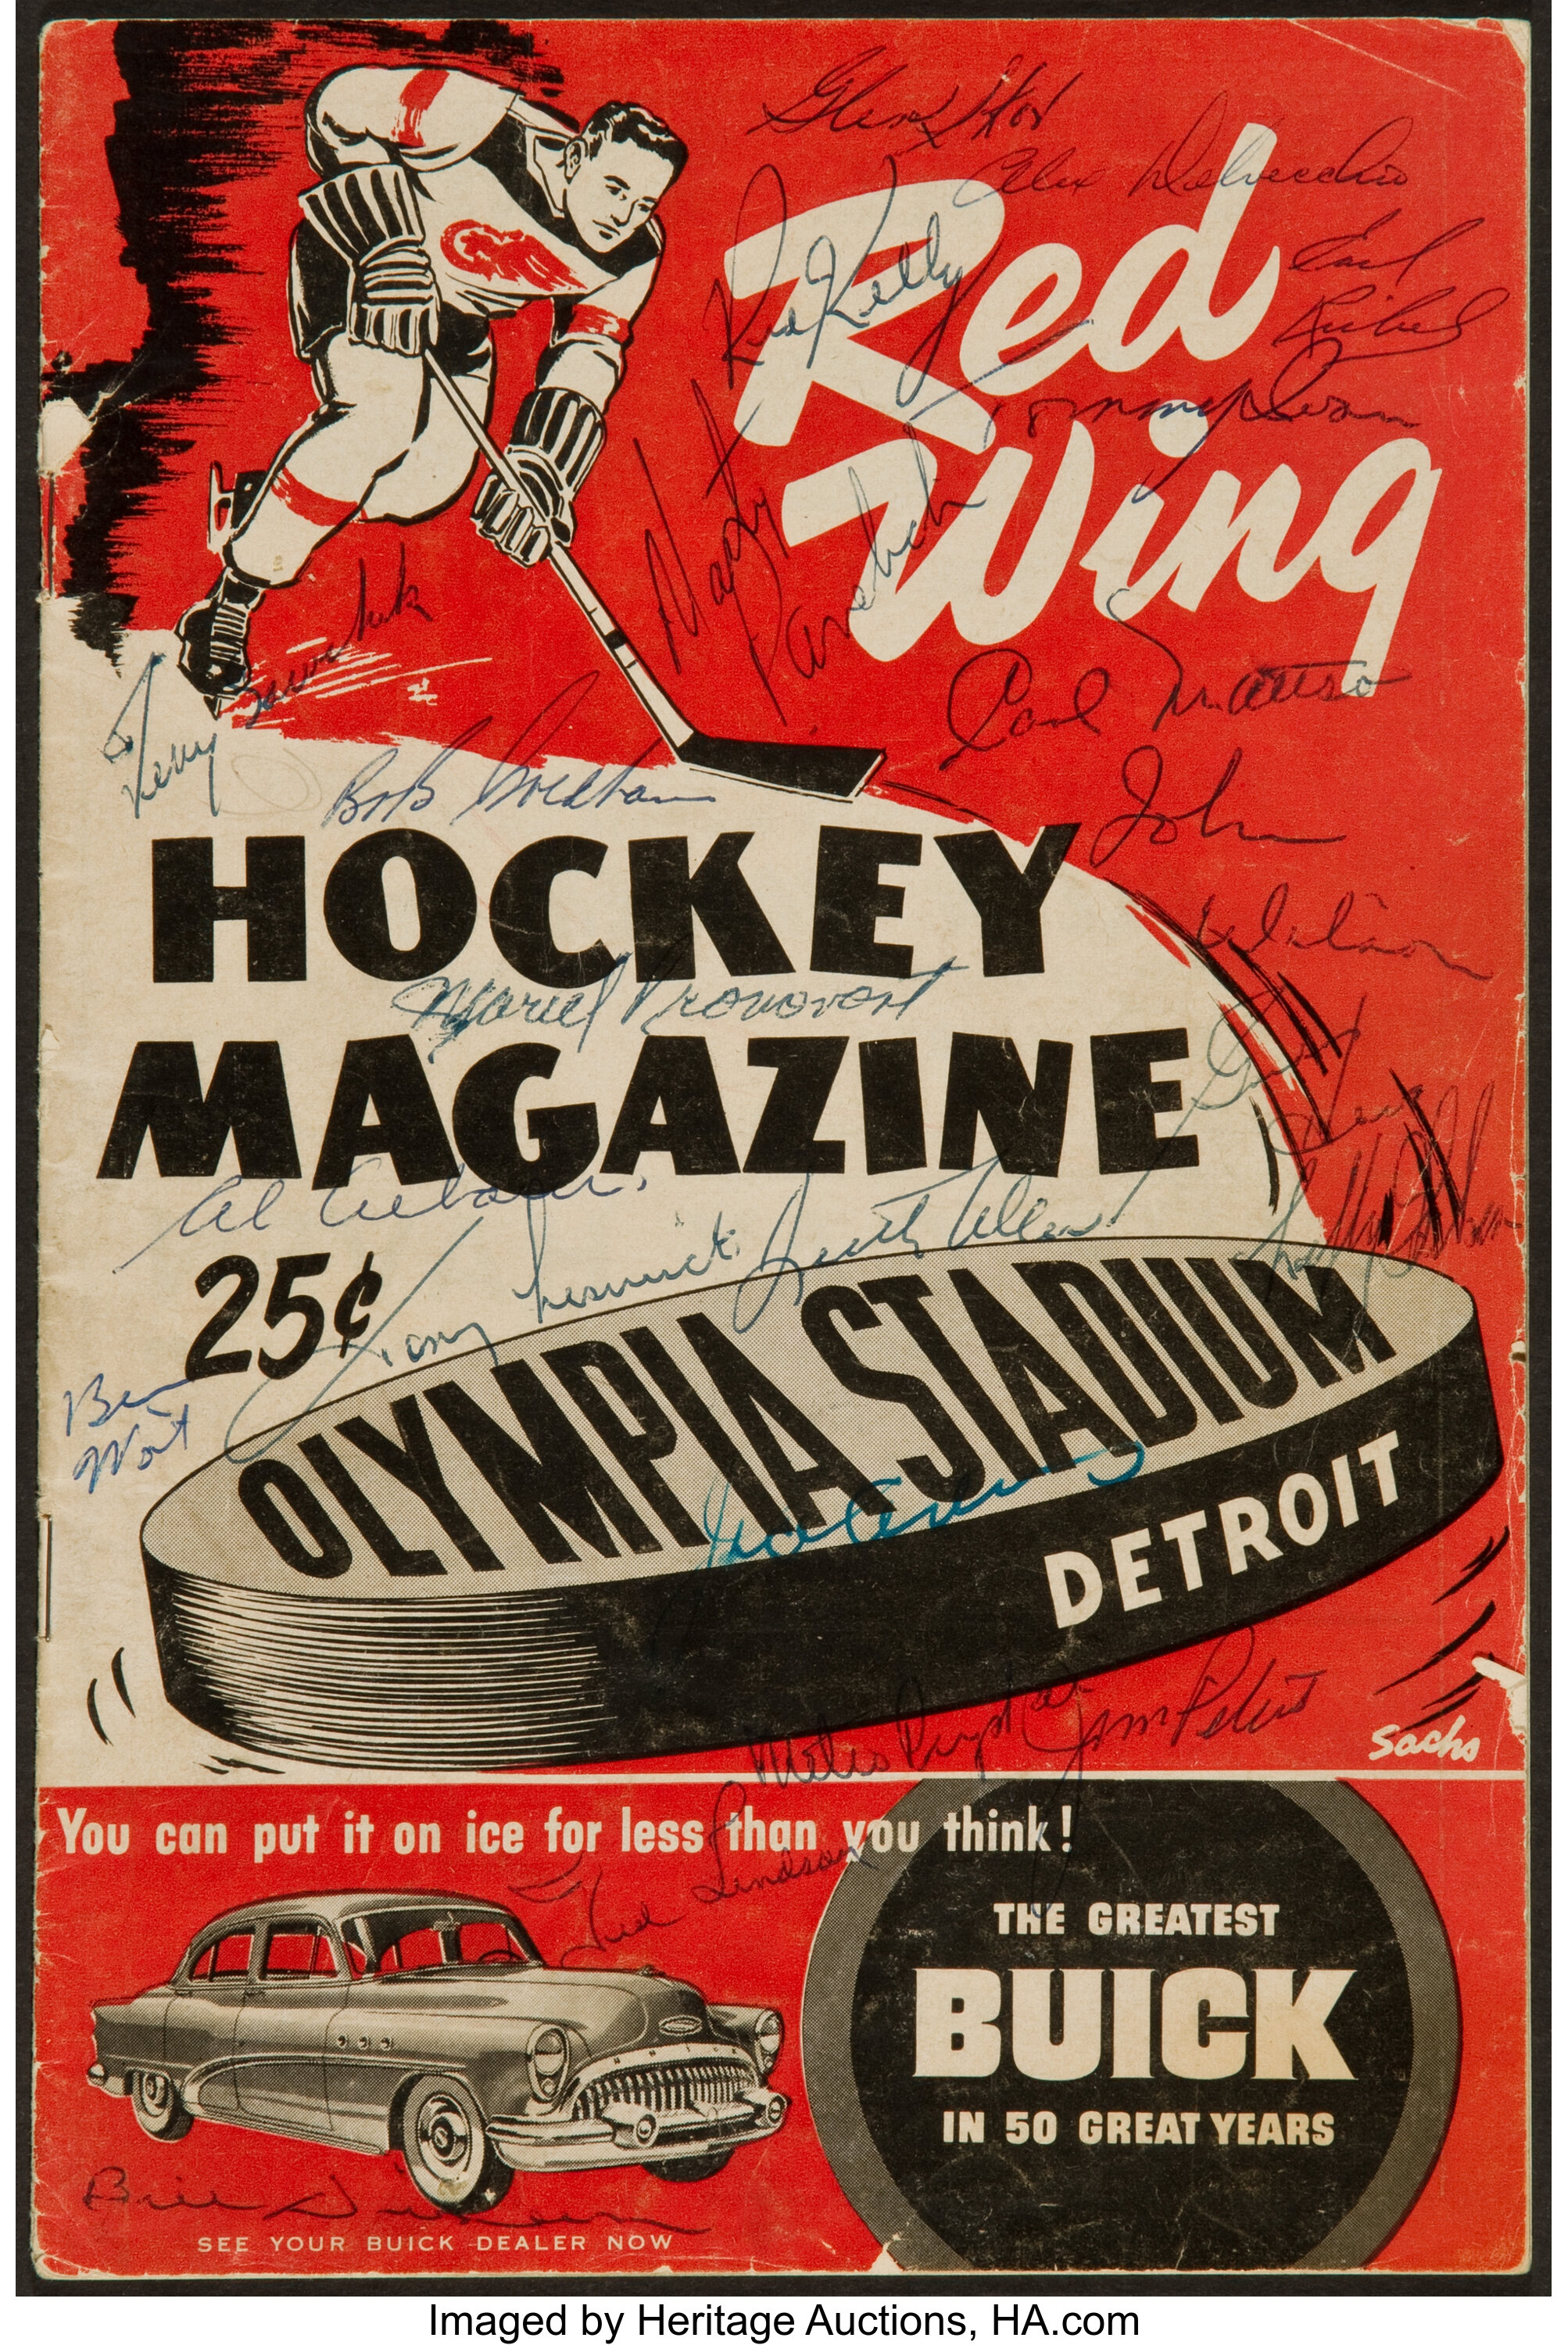 The toughest players in Red Wing history - Vintage Detroit Collection